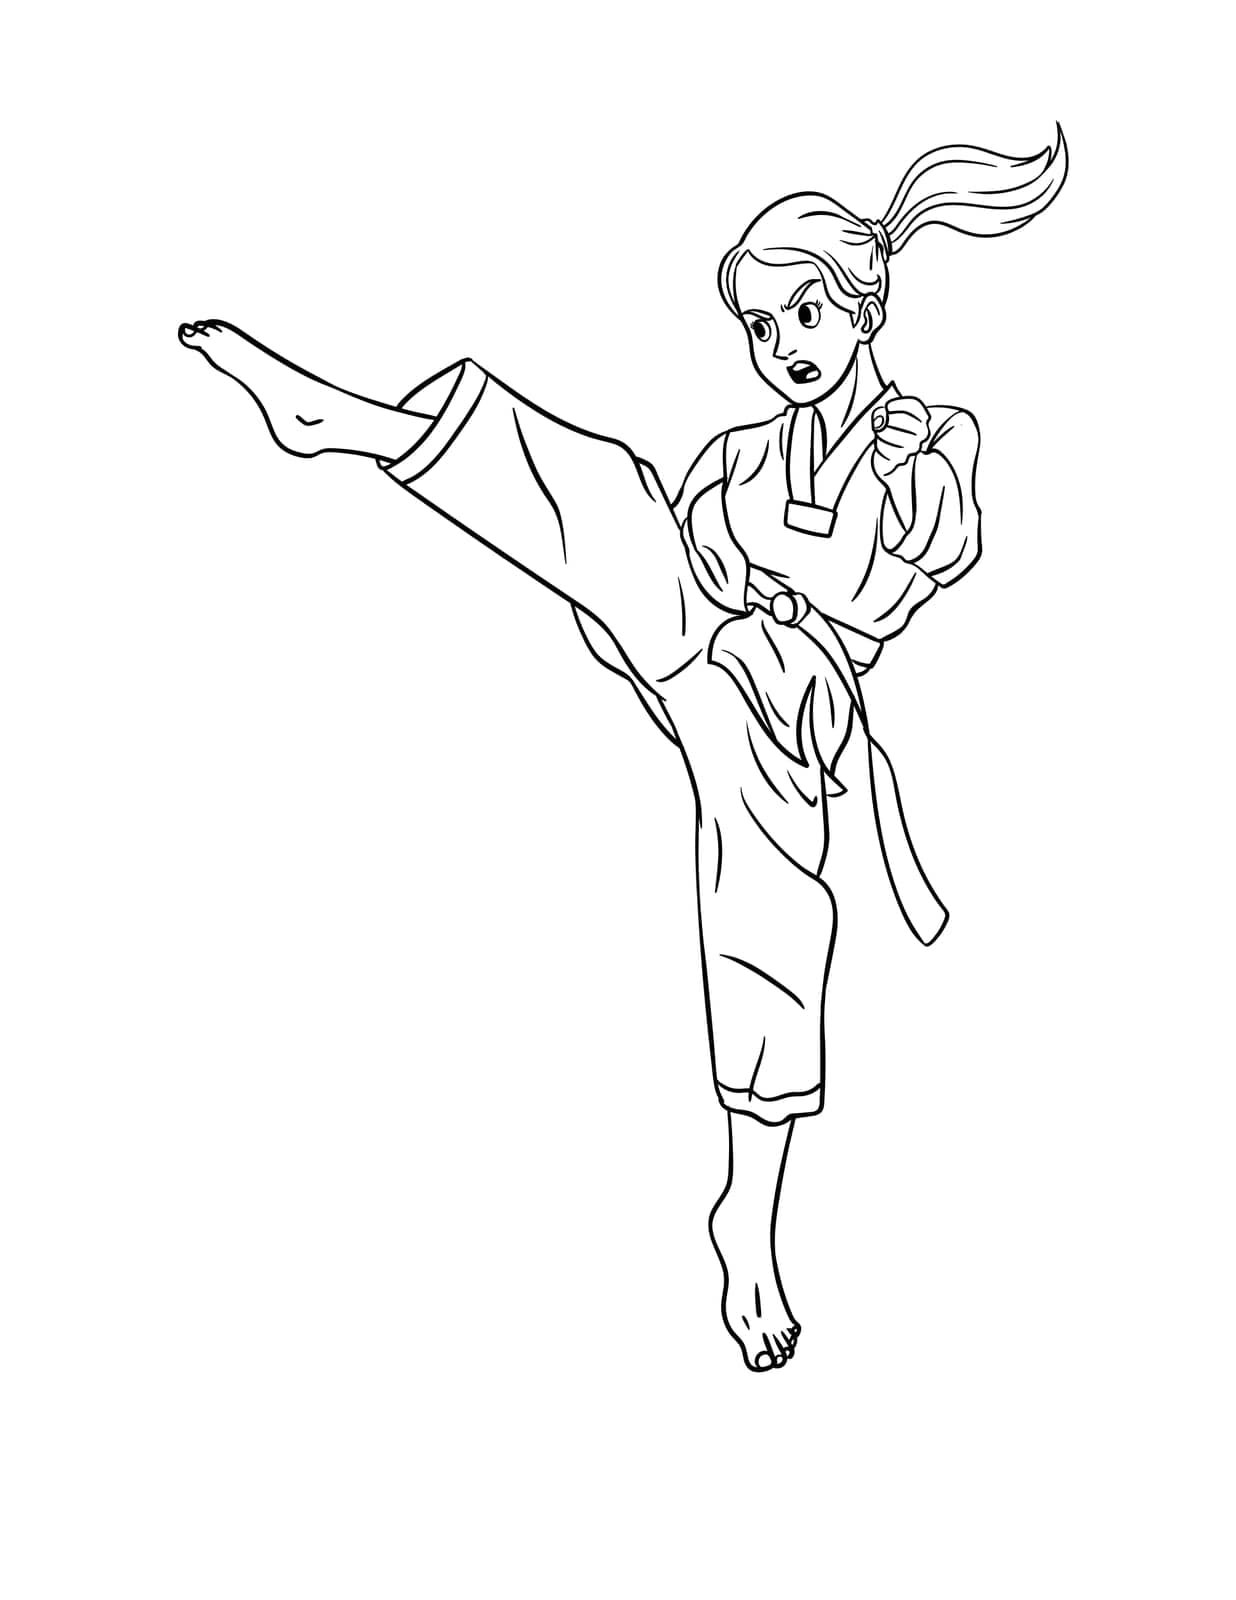 A cute and funny coloring page of Taekwondo. Provides hours of coloring fun for children. Color, this page is very easy. Suitable for little kids and toddlers.